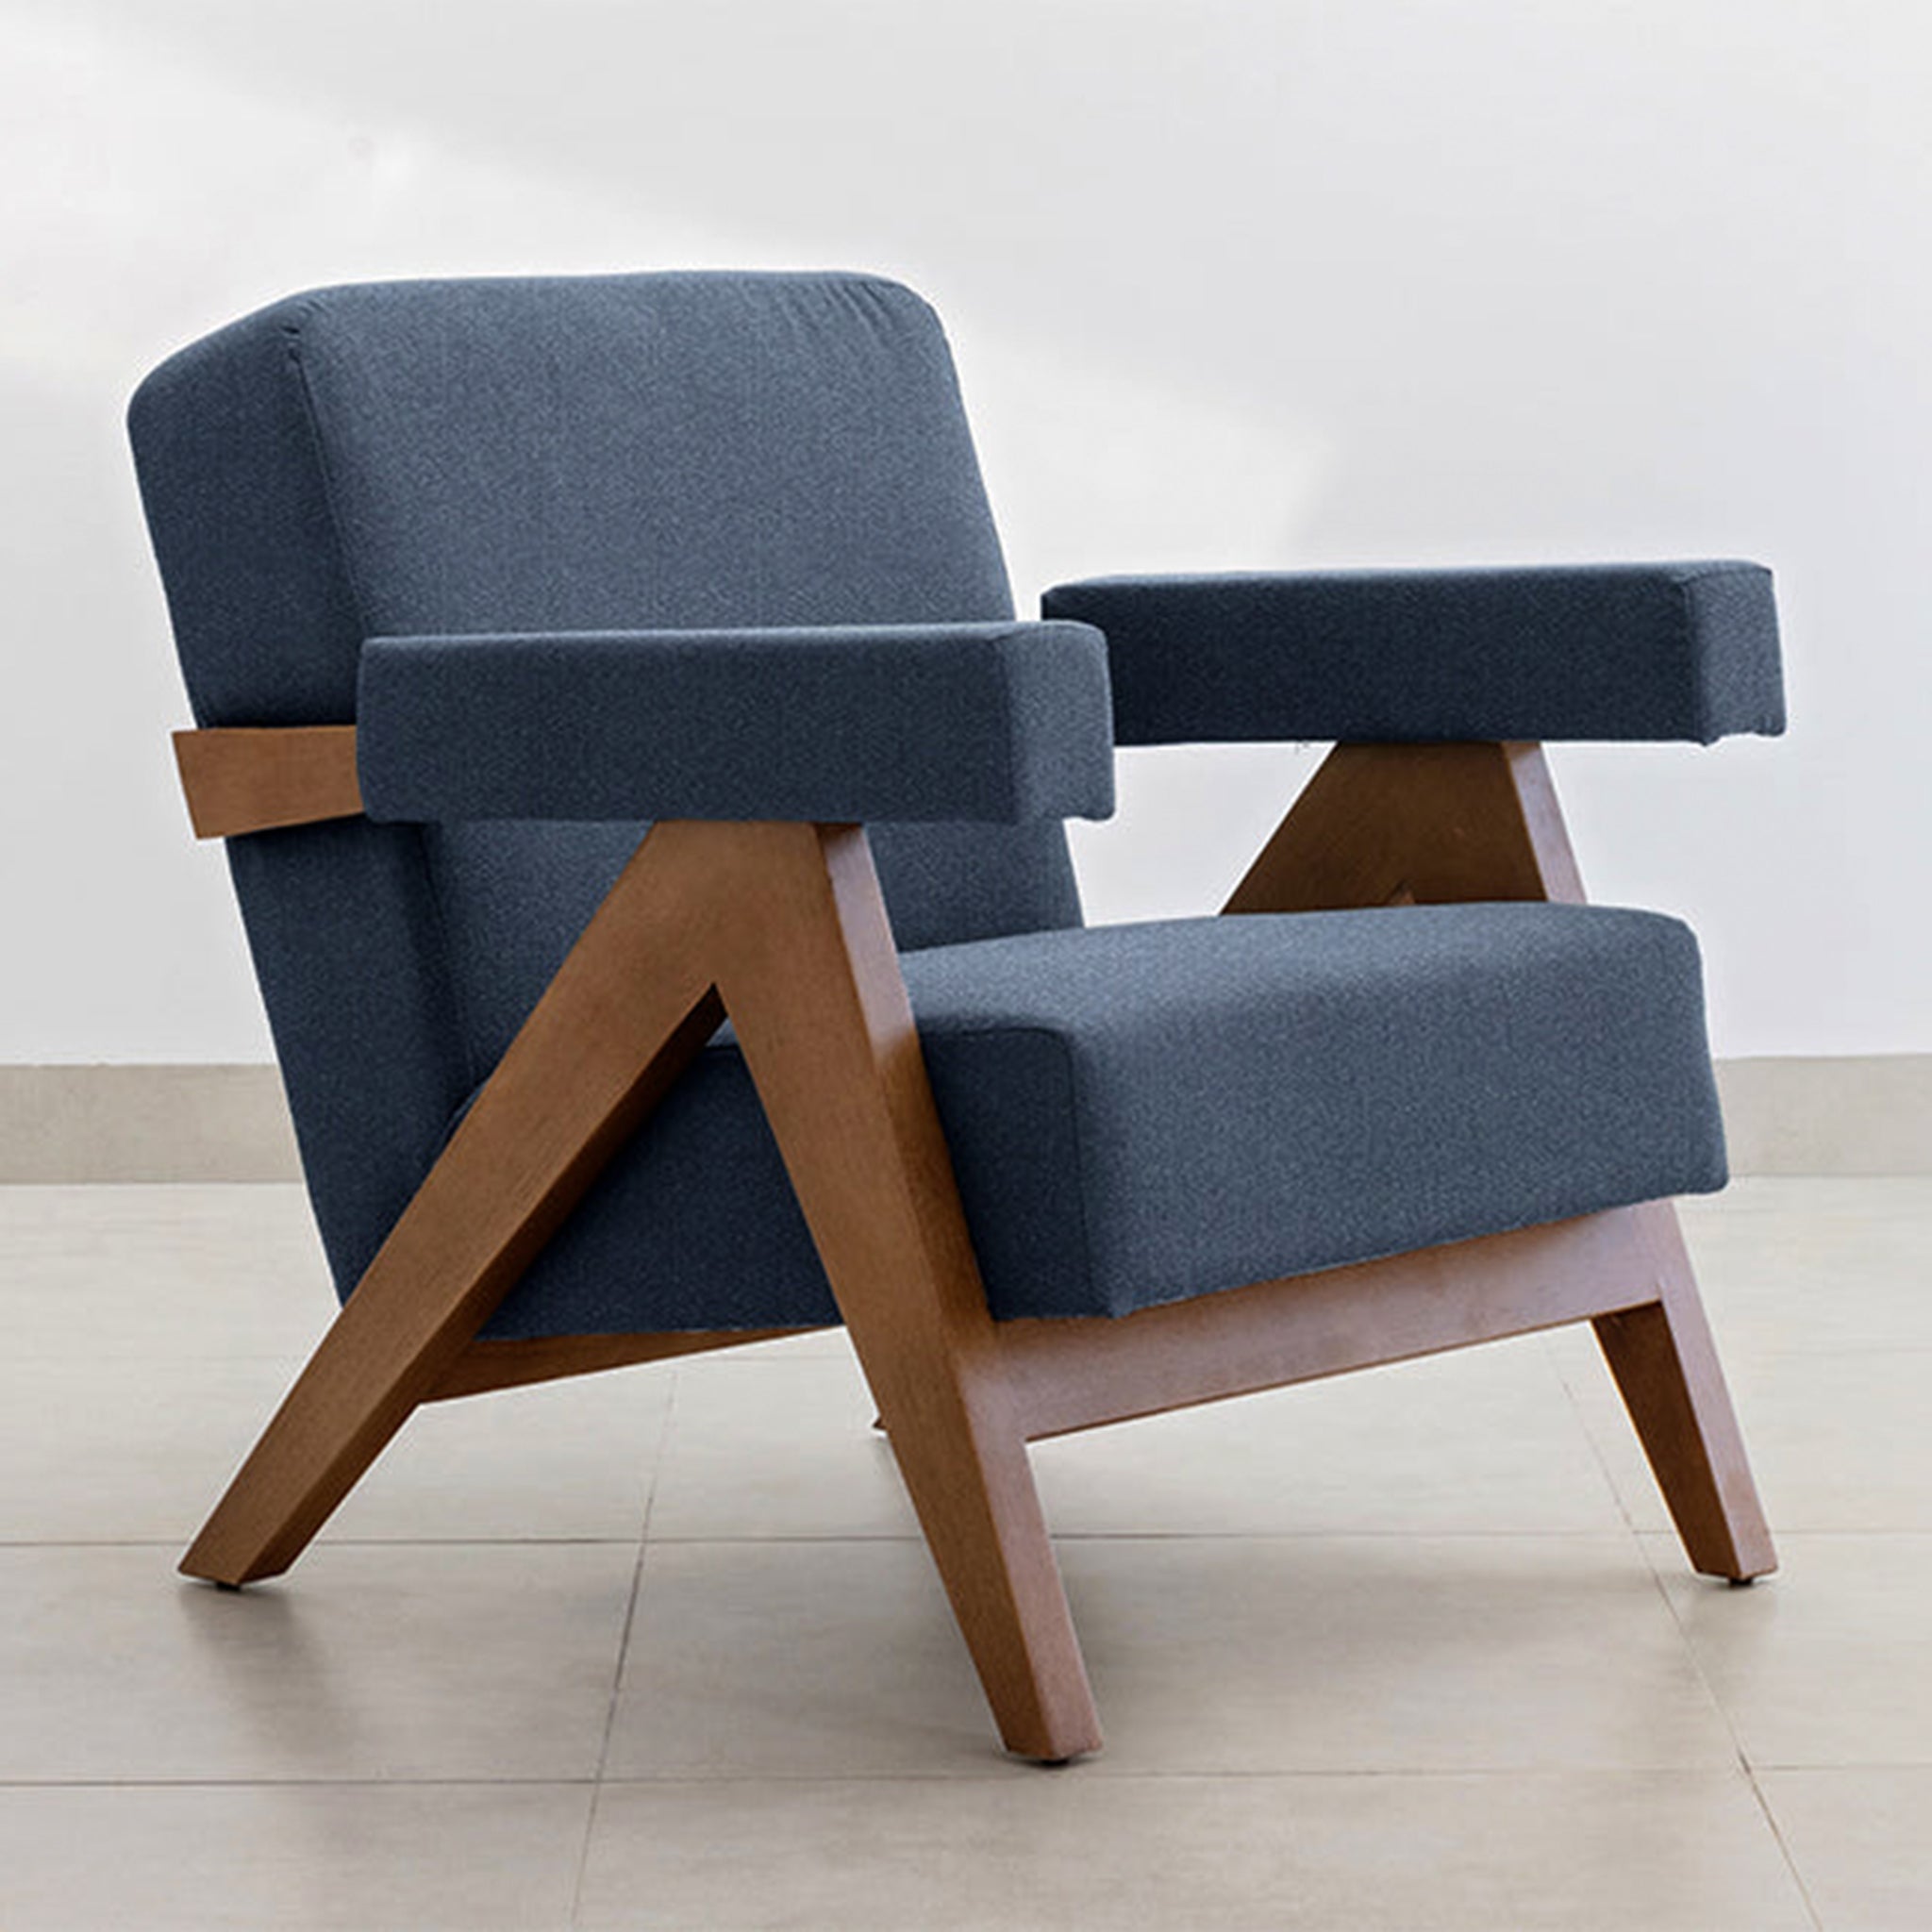 "Sophisticated The Pierre Accent Chair with a wooden base and teal fabric."